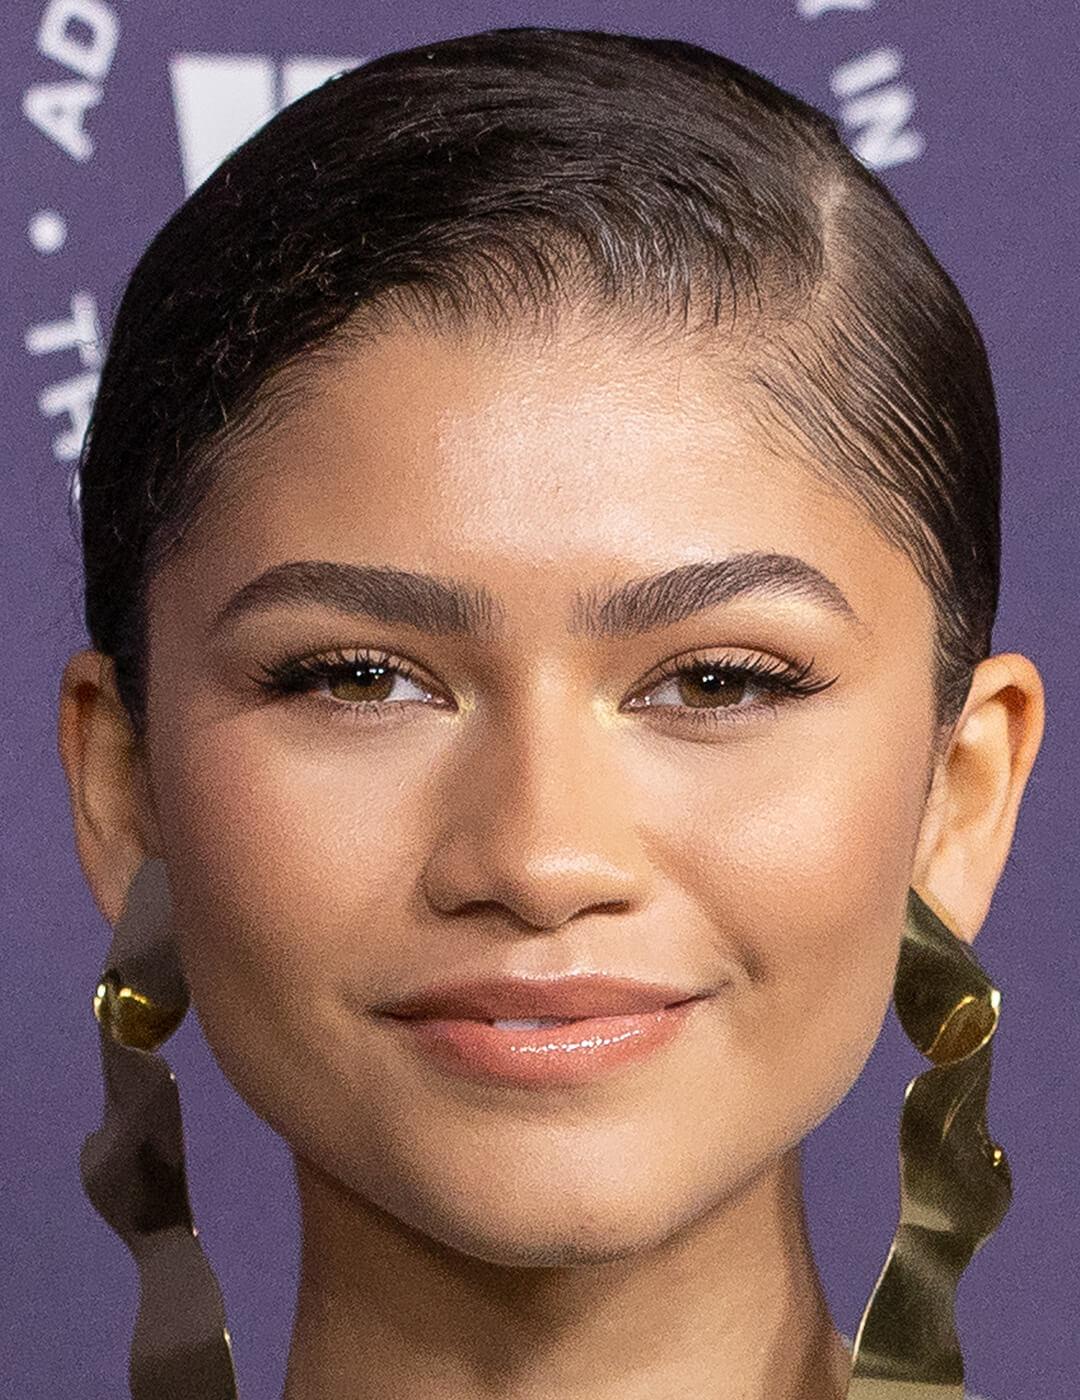 A photo of Zendaya with a neutral makeup look, wearing gold earrings